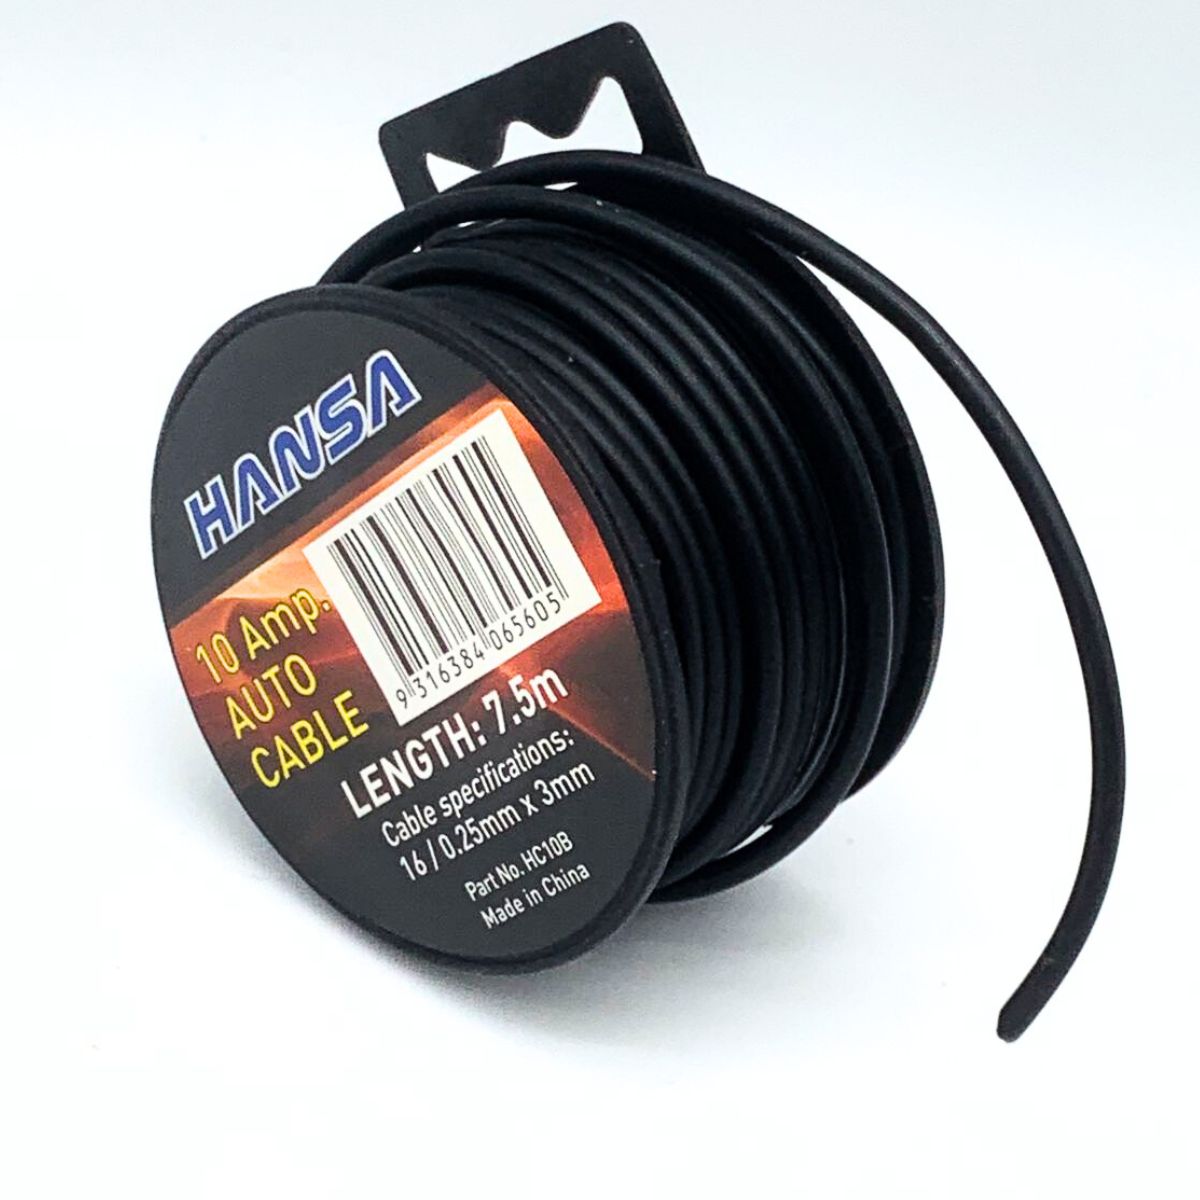 10 Amp Auto Cable, 7.5 Metres (Black) - South East Clearance Centre